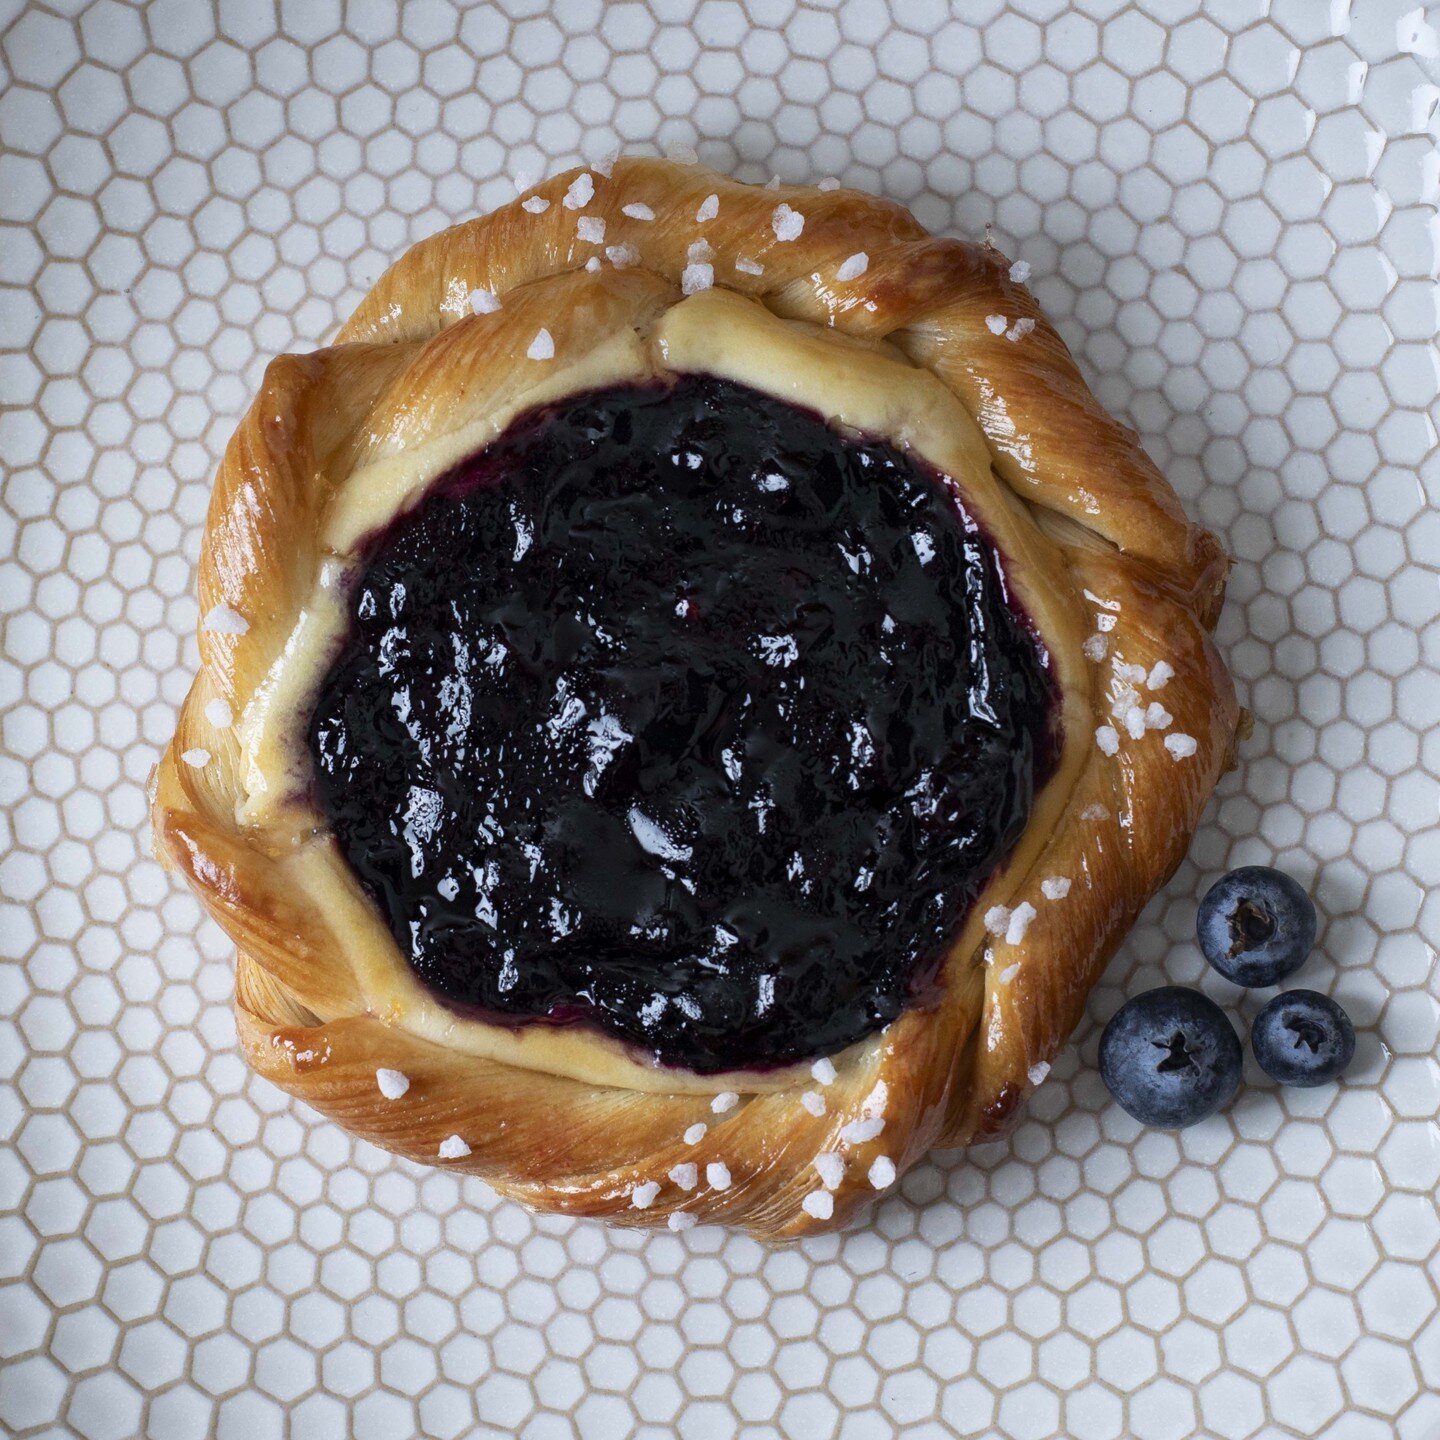 Welcome our new seasonal breakfast pastry, the Blueberry Cream Cheese Danish! This sweet and tangy treat is the perfect pairing for your morning tea or coffee.